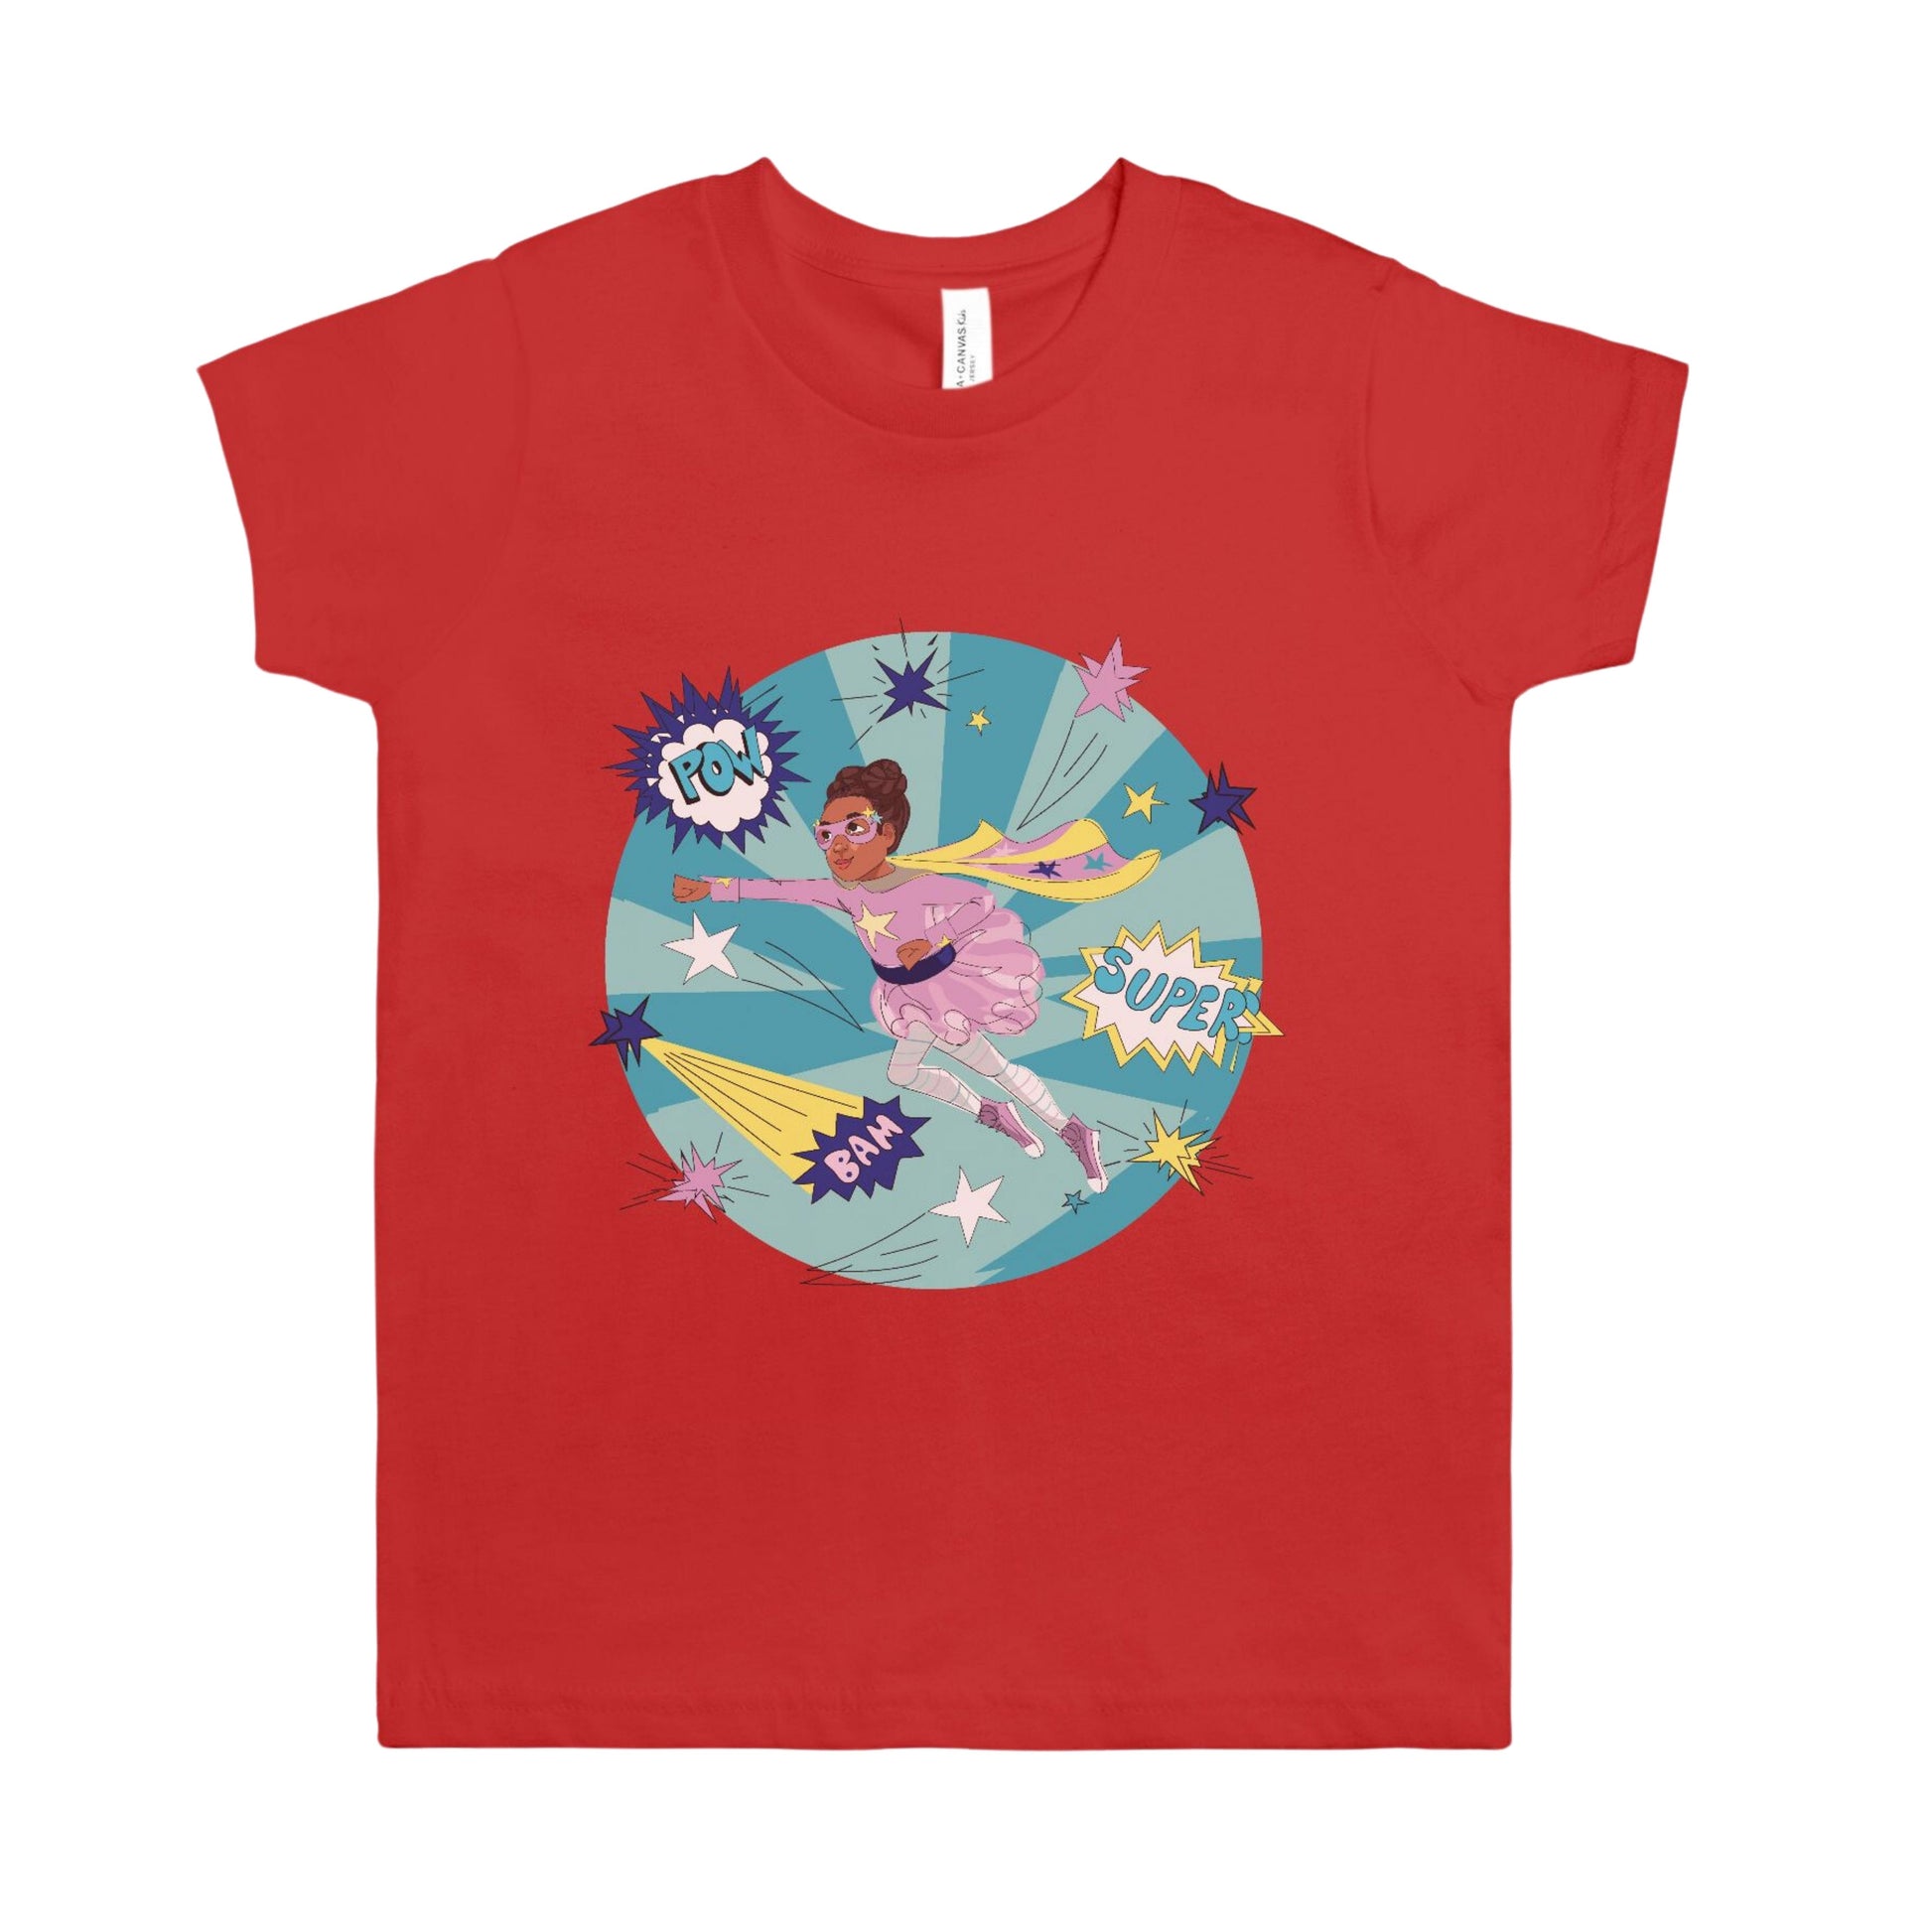 Black Supergirl Shirt Graphic Tee for Kids